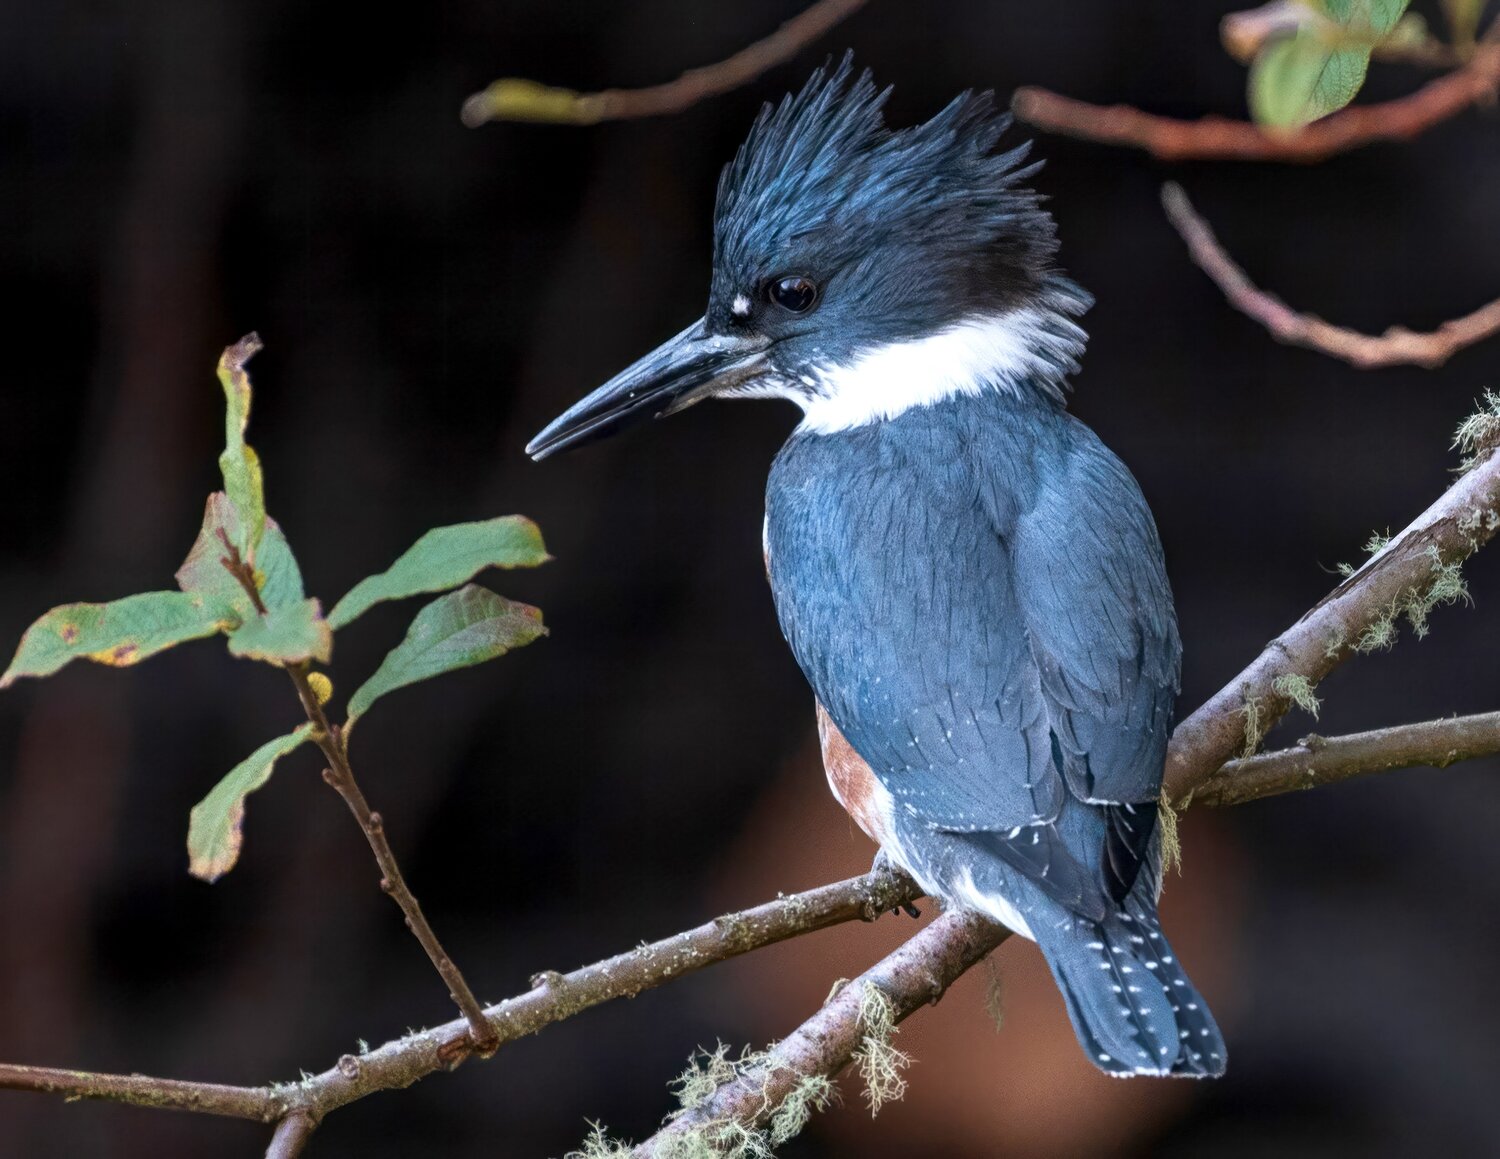 A female belted kingfisher at Minter Creek.